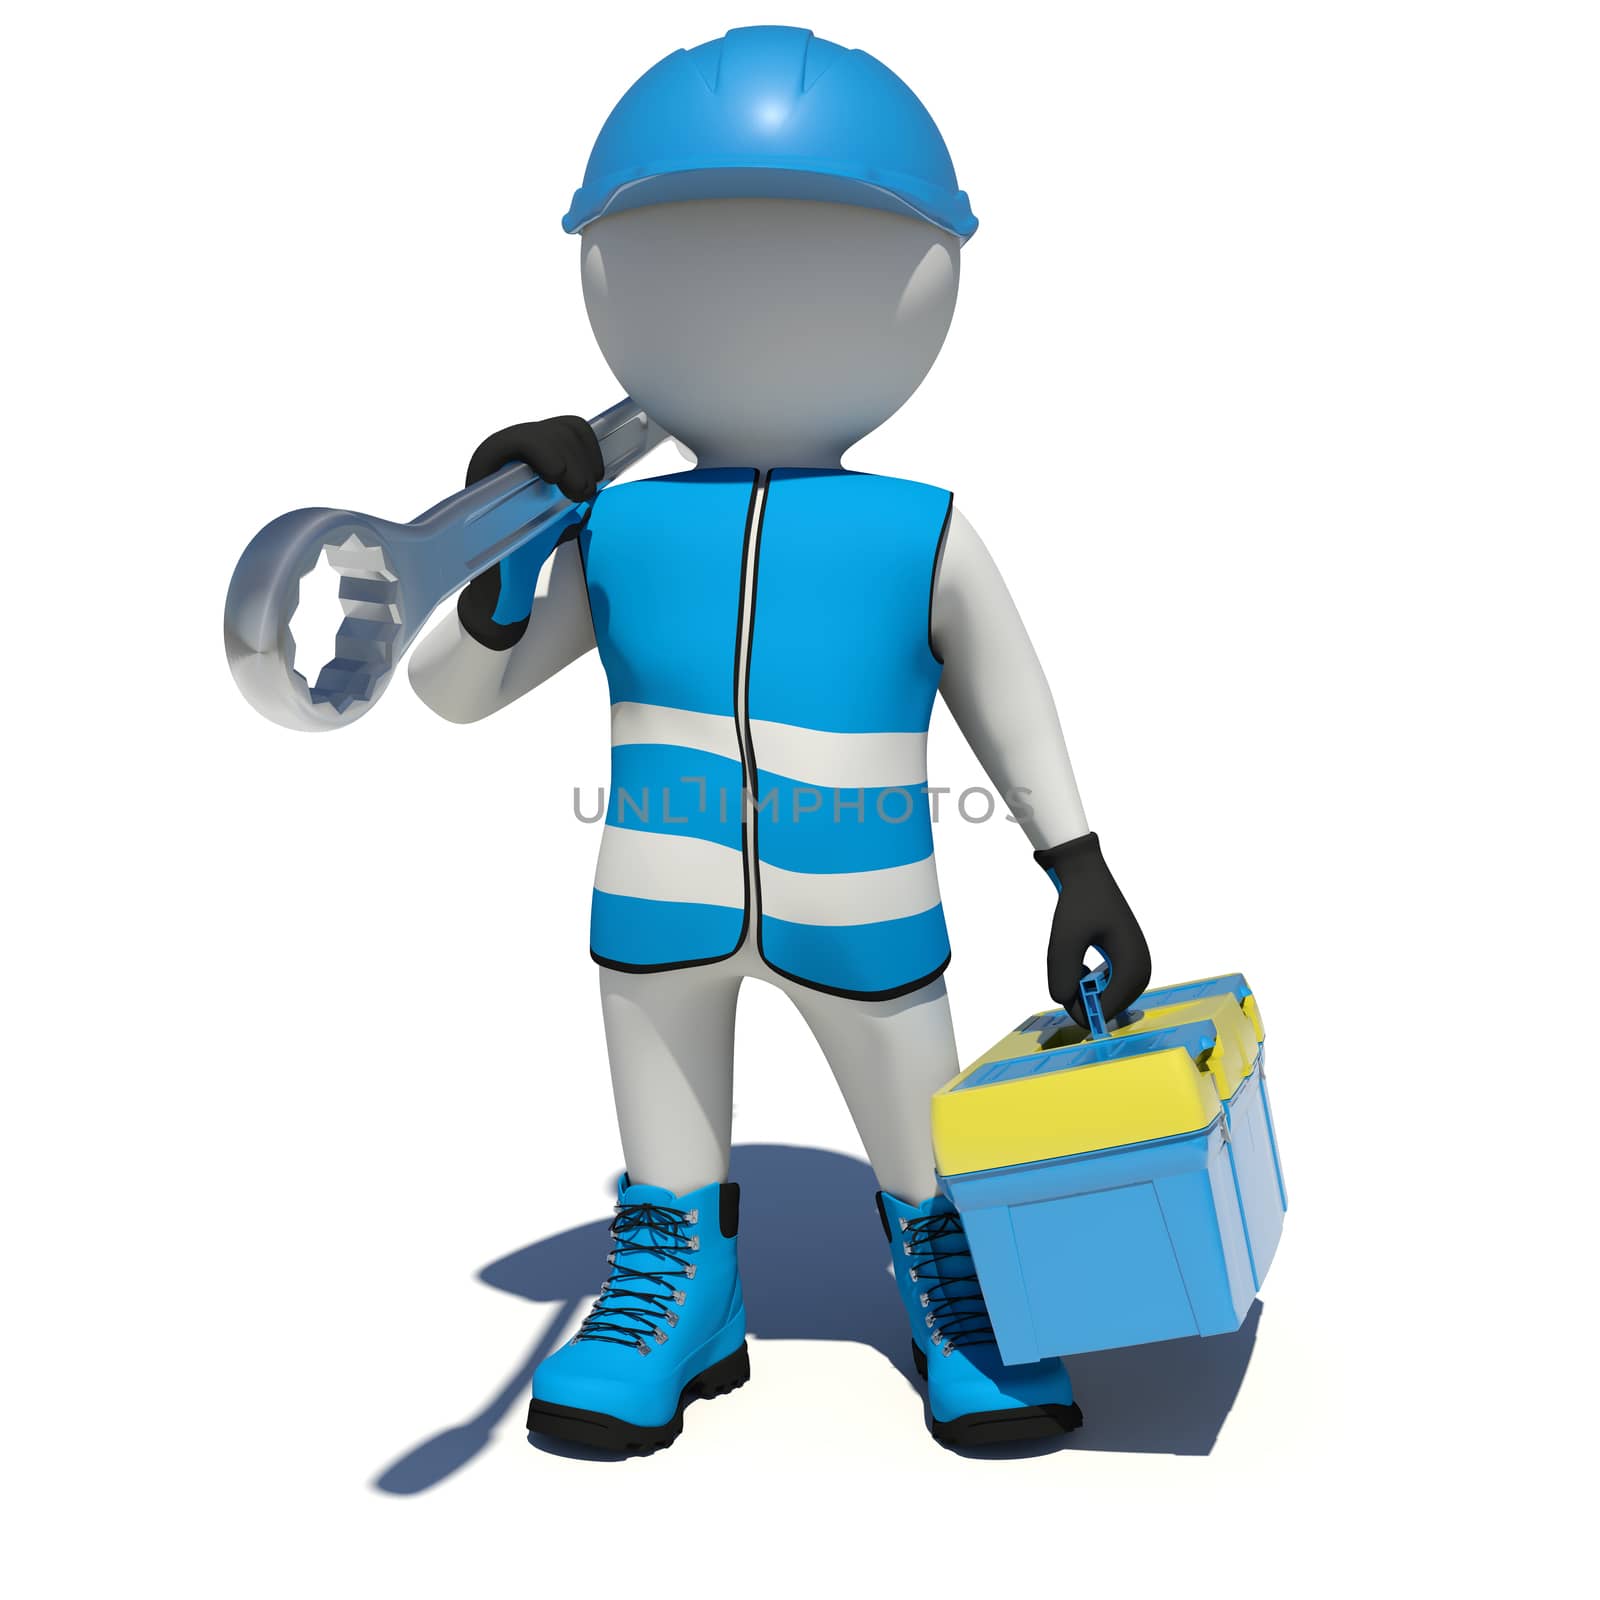 White man in overalls holding tool box and wrench on his shoulder. Isolated render on white background